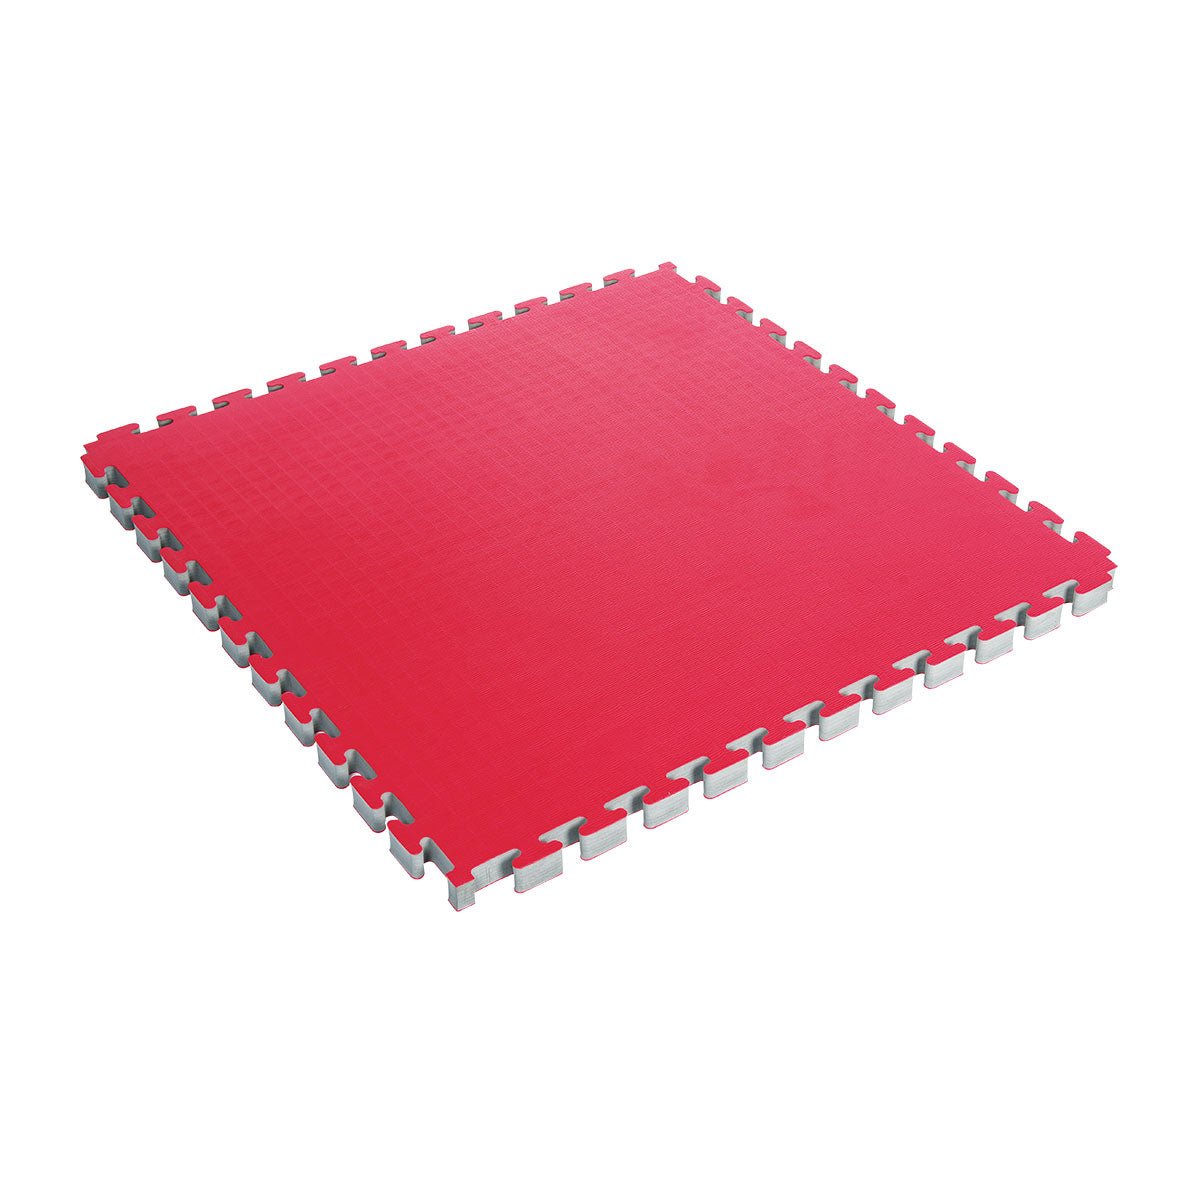 Reversible 1.5" Thick Puzzle Mat 1.5" Red/Black